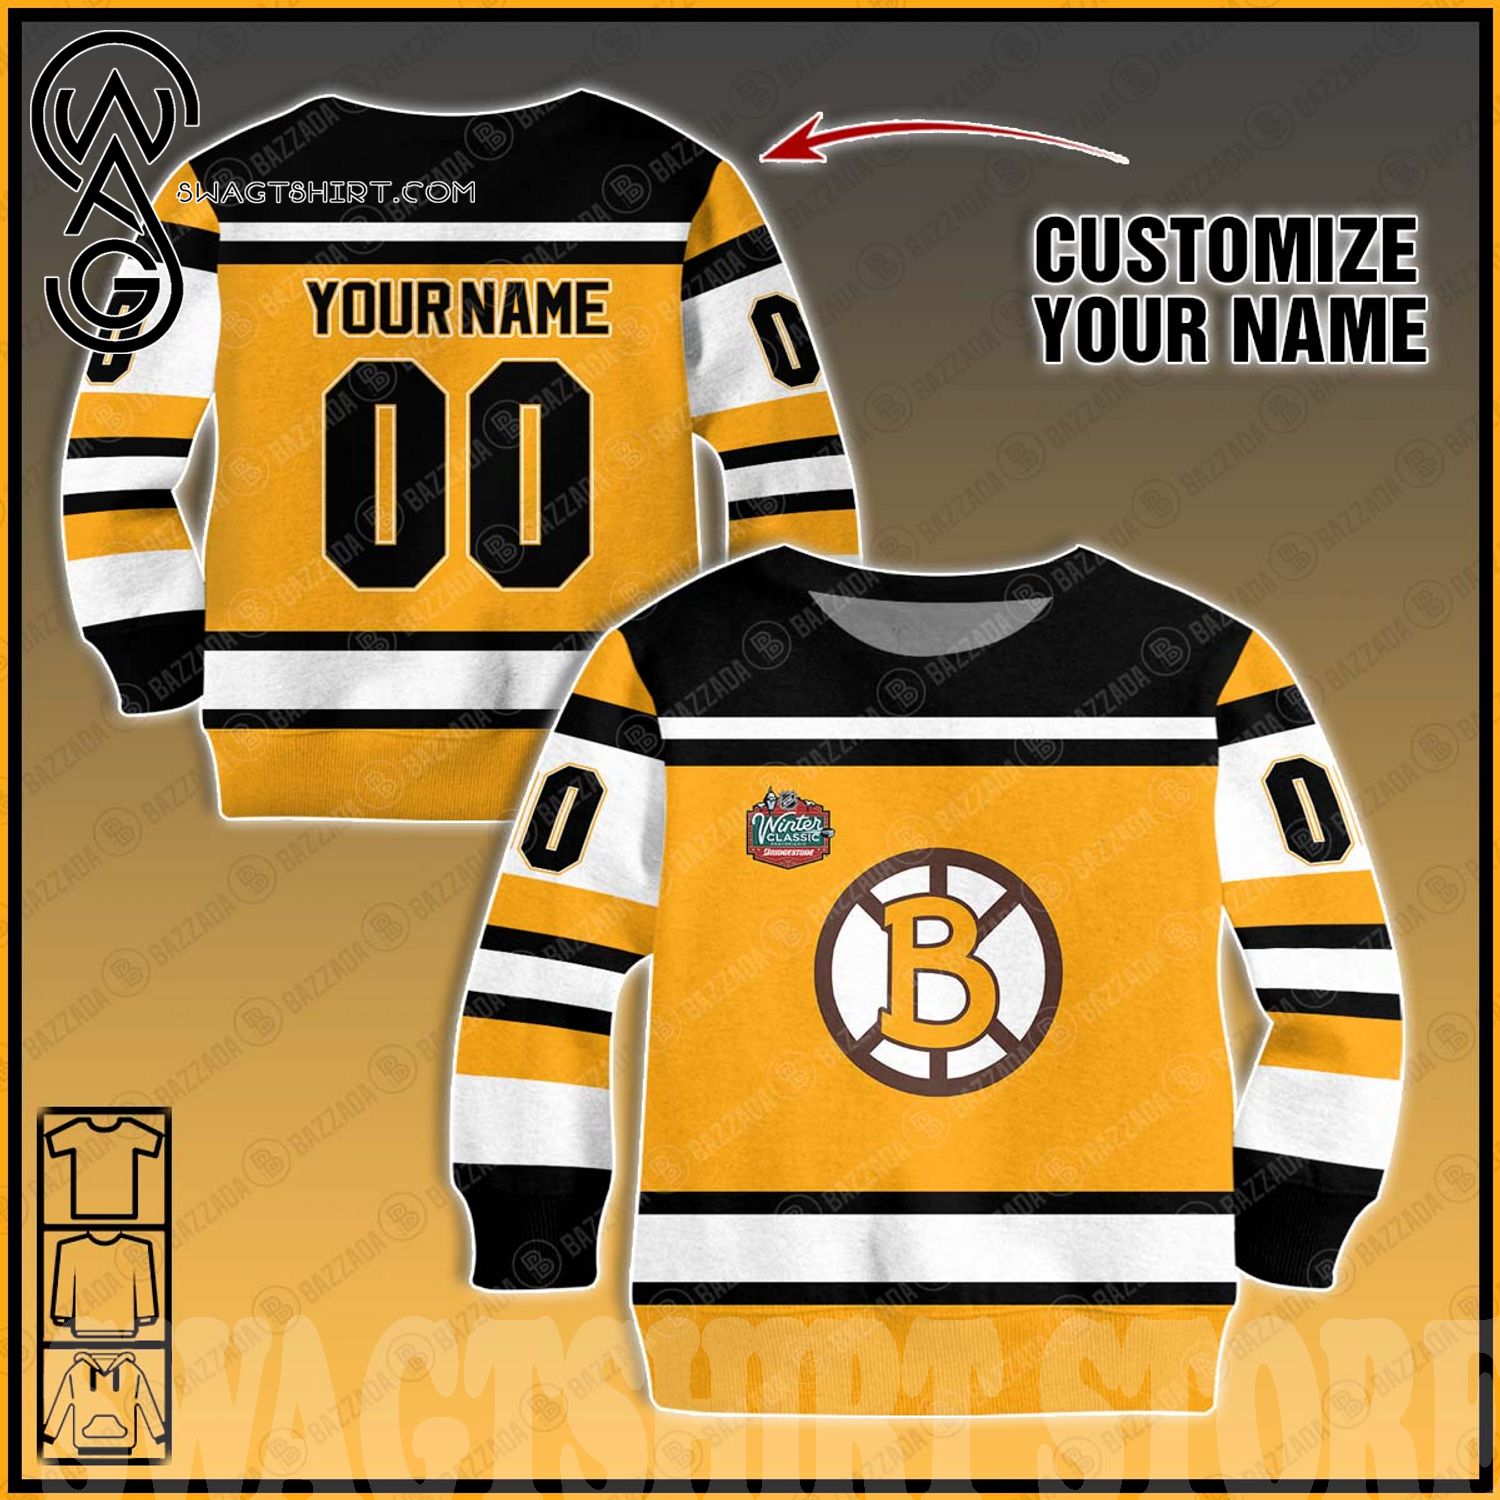 Boston Bruins Customized Number Kit for 2010 Winter Classic Jersey